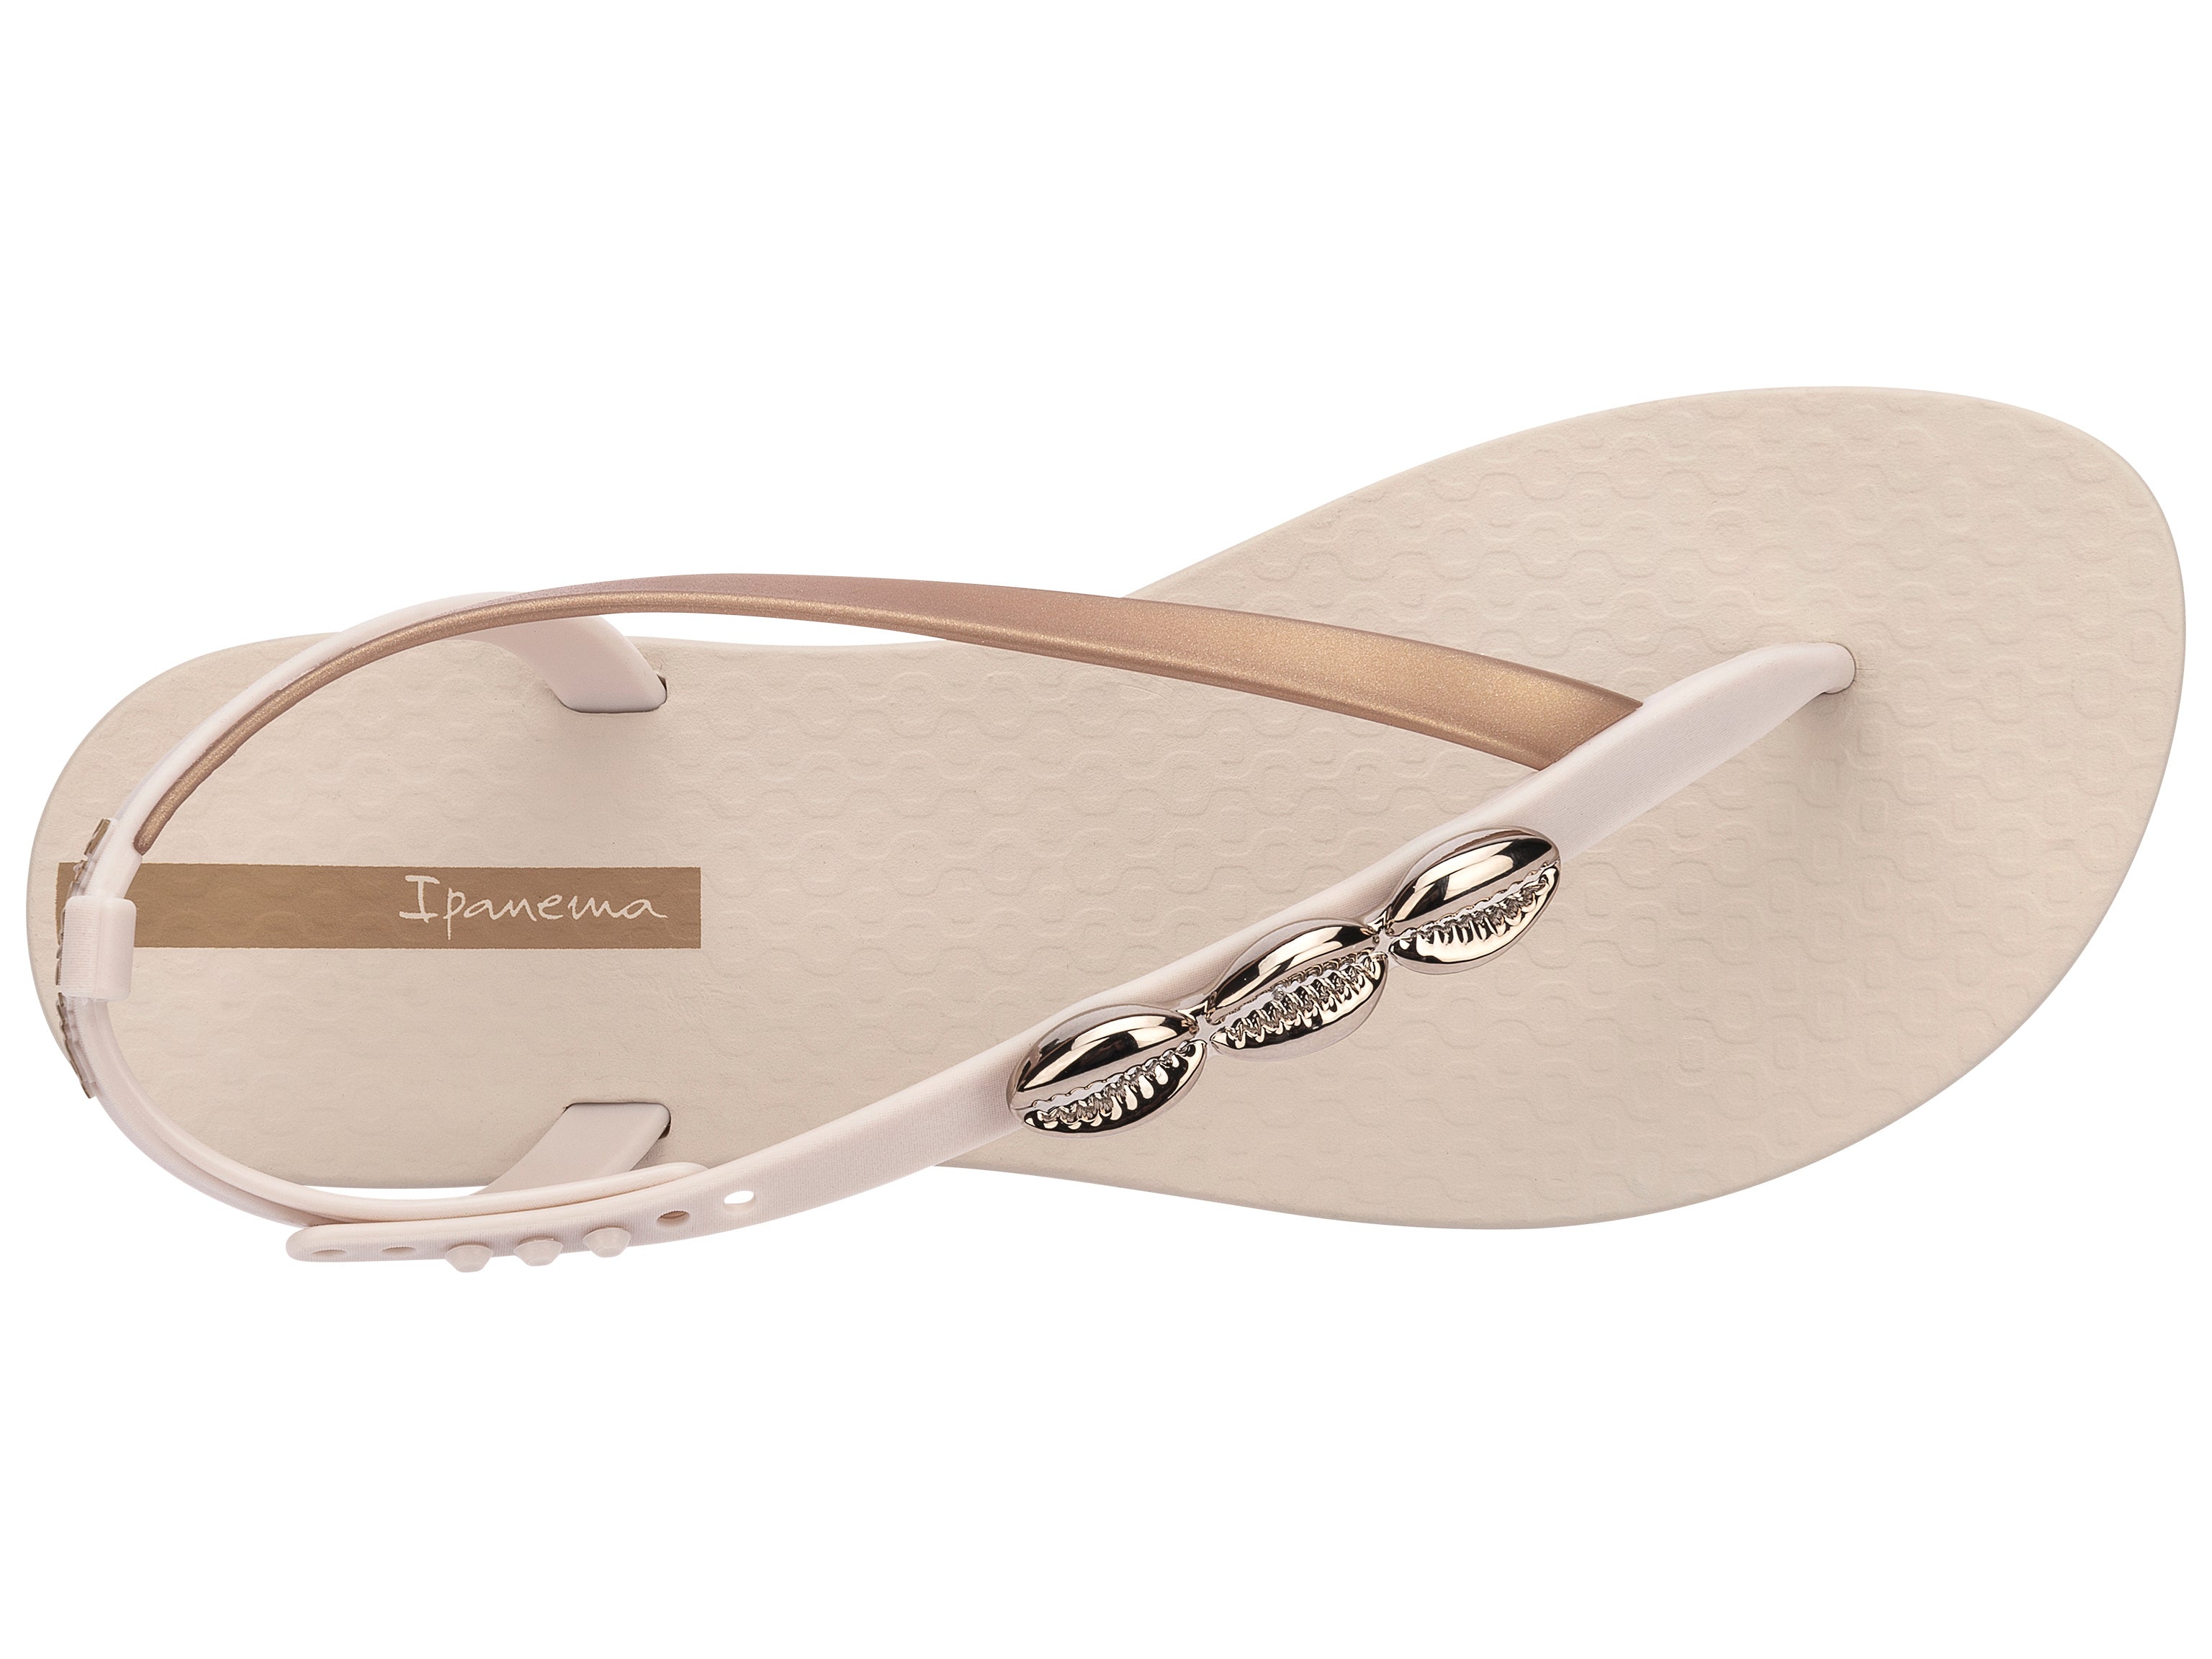 Top view of a beige Ipanema Salty women's sandal with 3 gold shells on the strap.